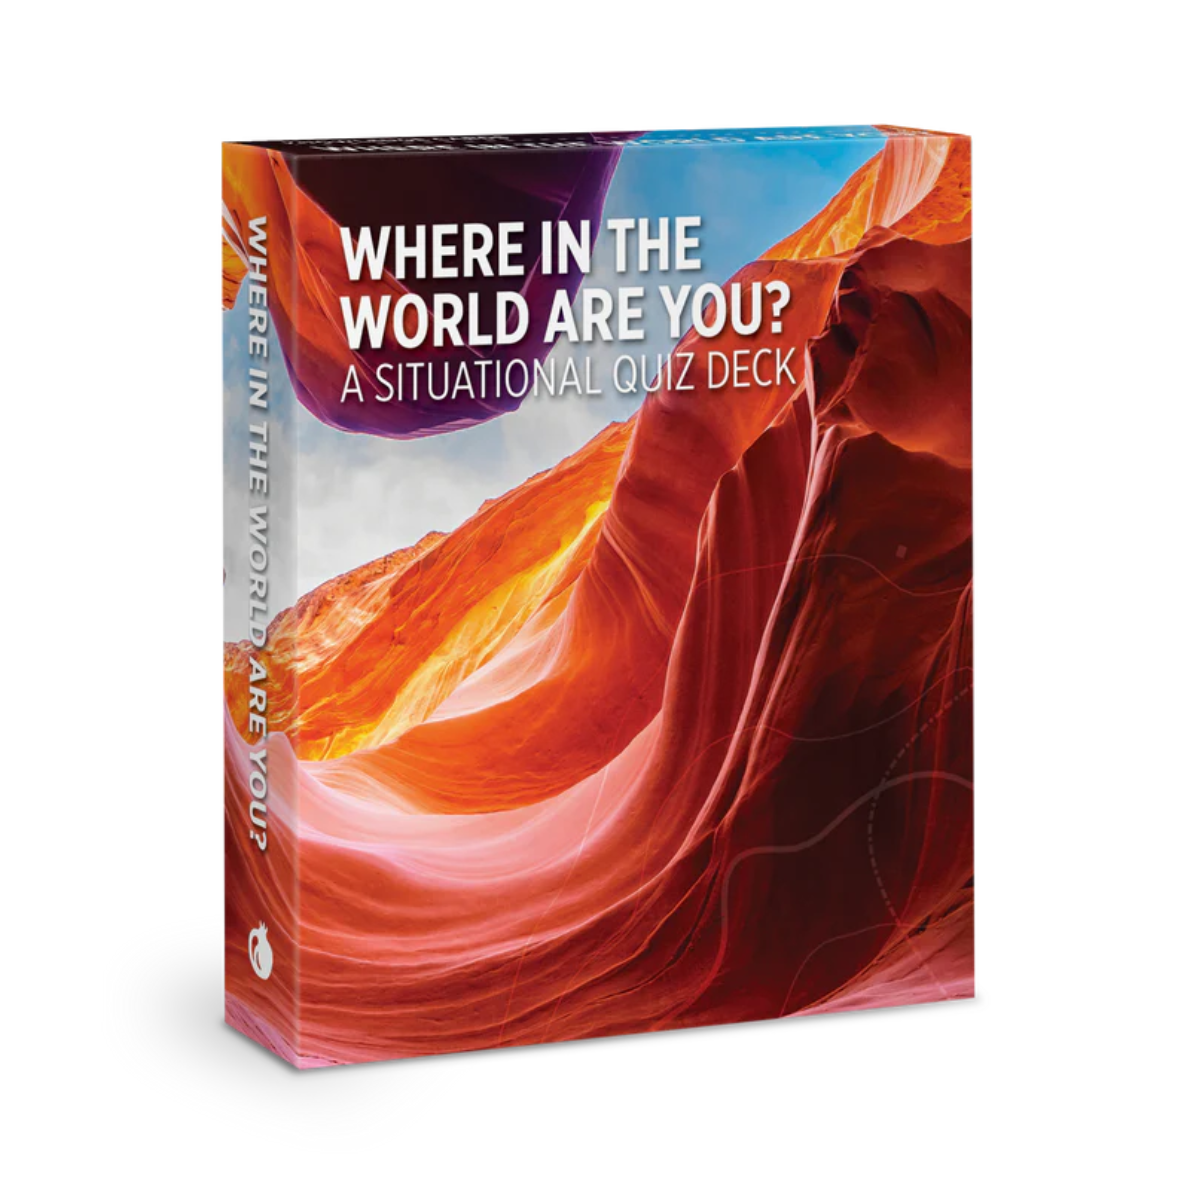 Where In The World Are You? A Situational Quiz Deck